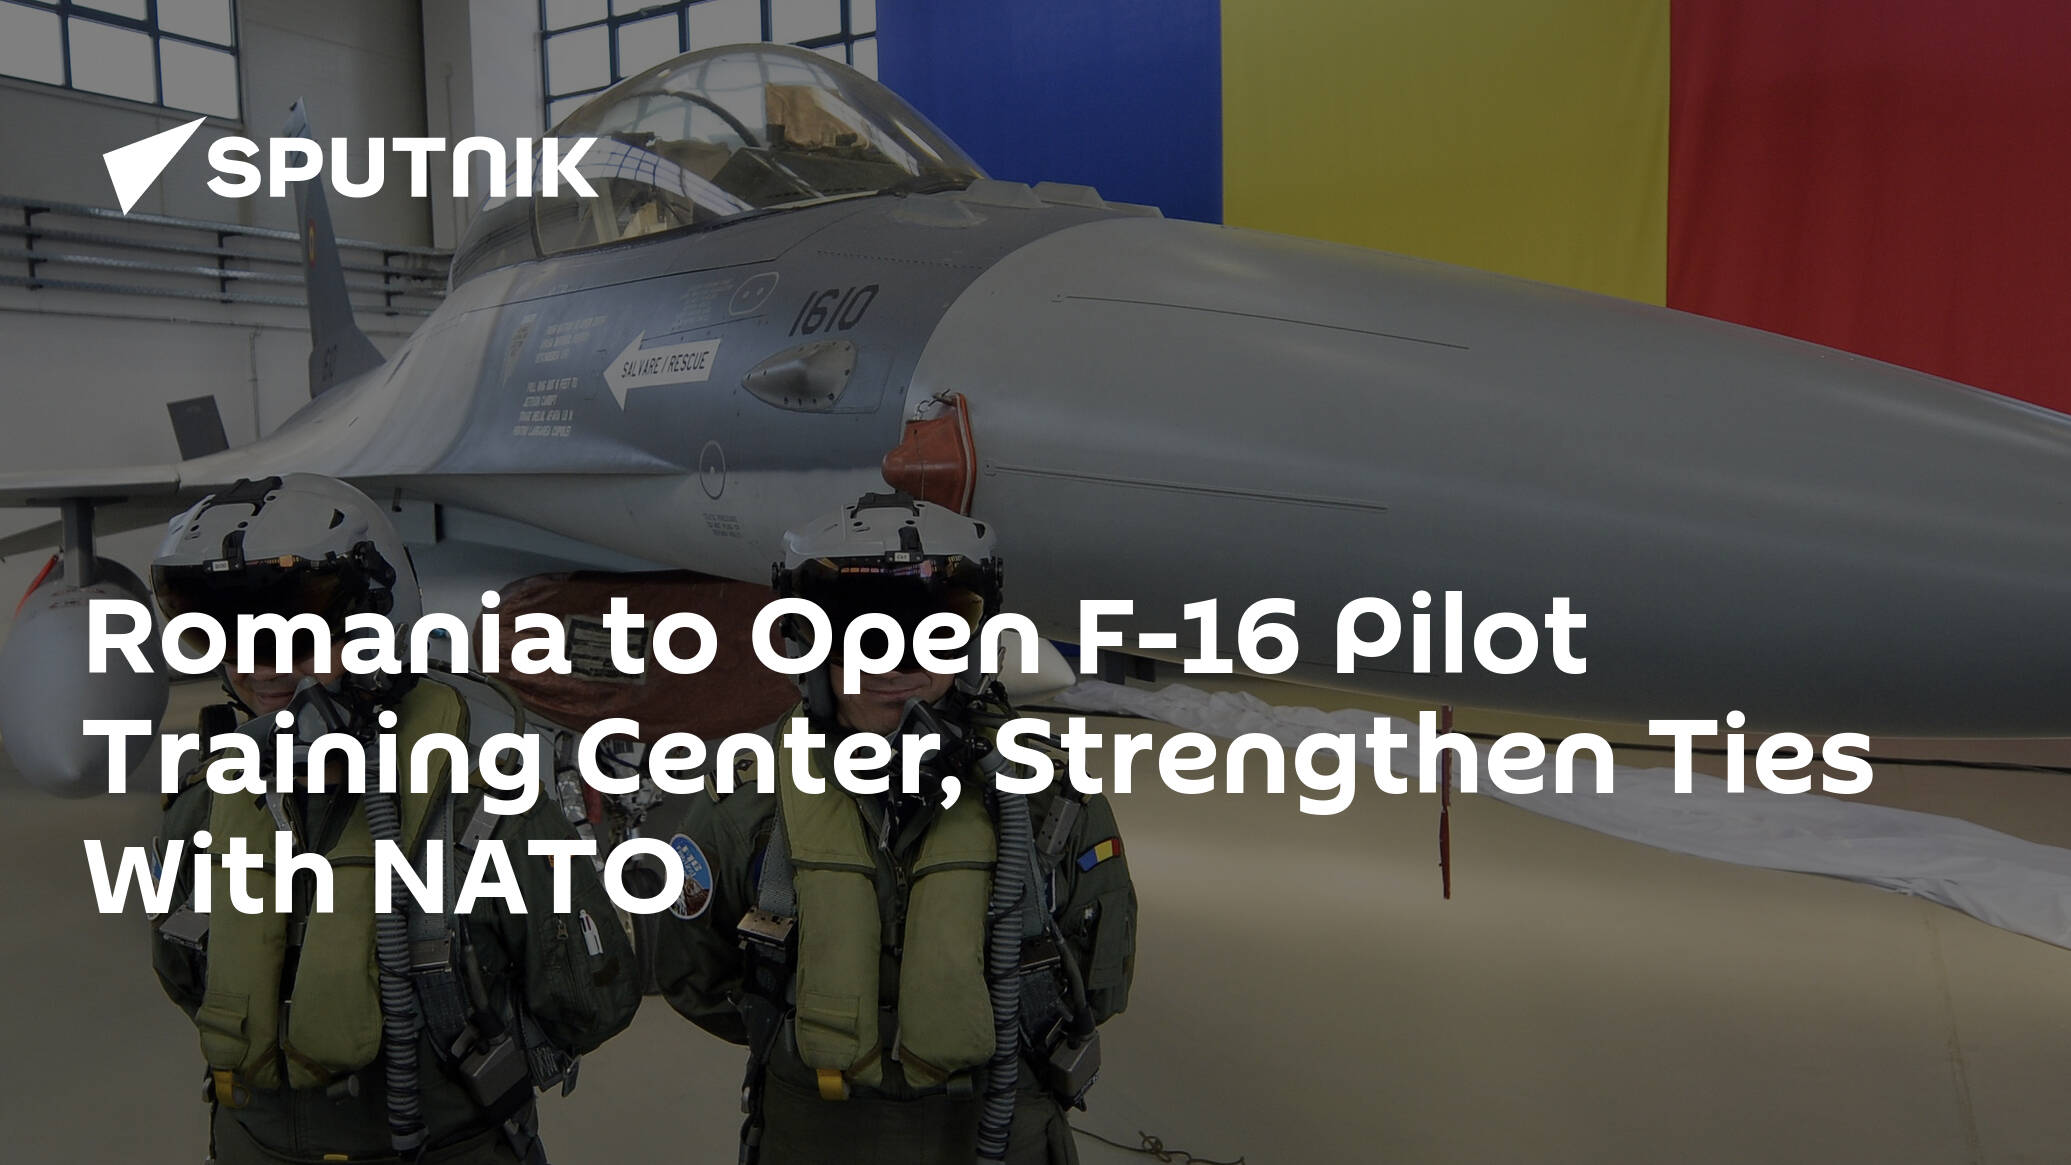 Romania to Open F-16 Pilot Training Center, Strengthen Ties With NATO